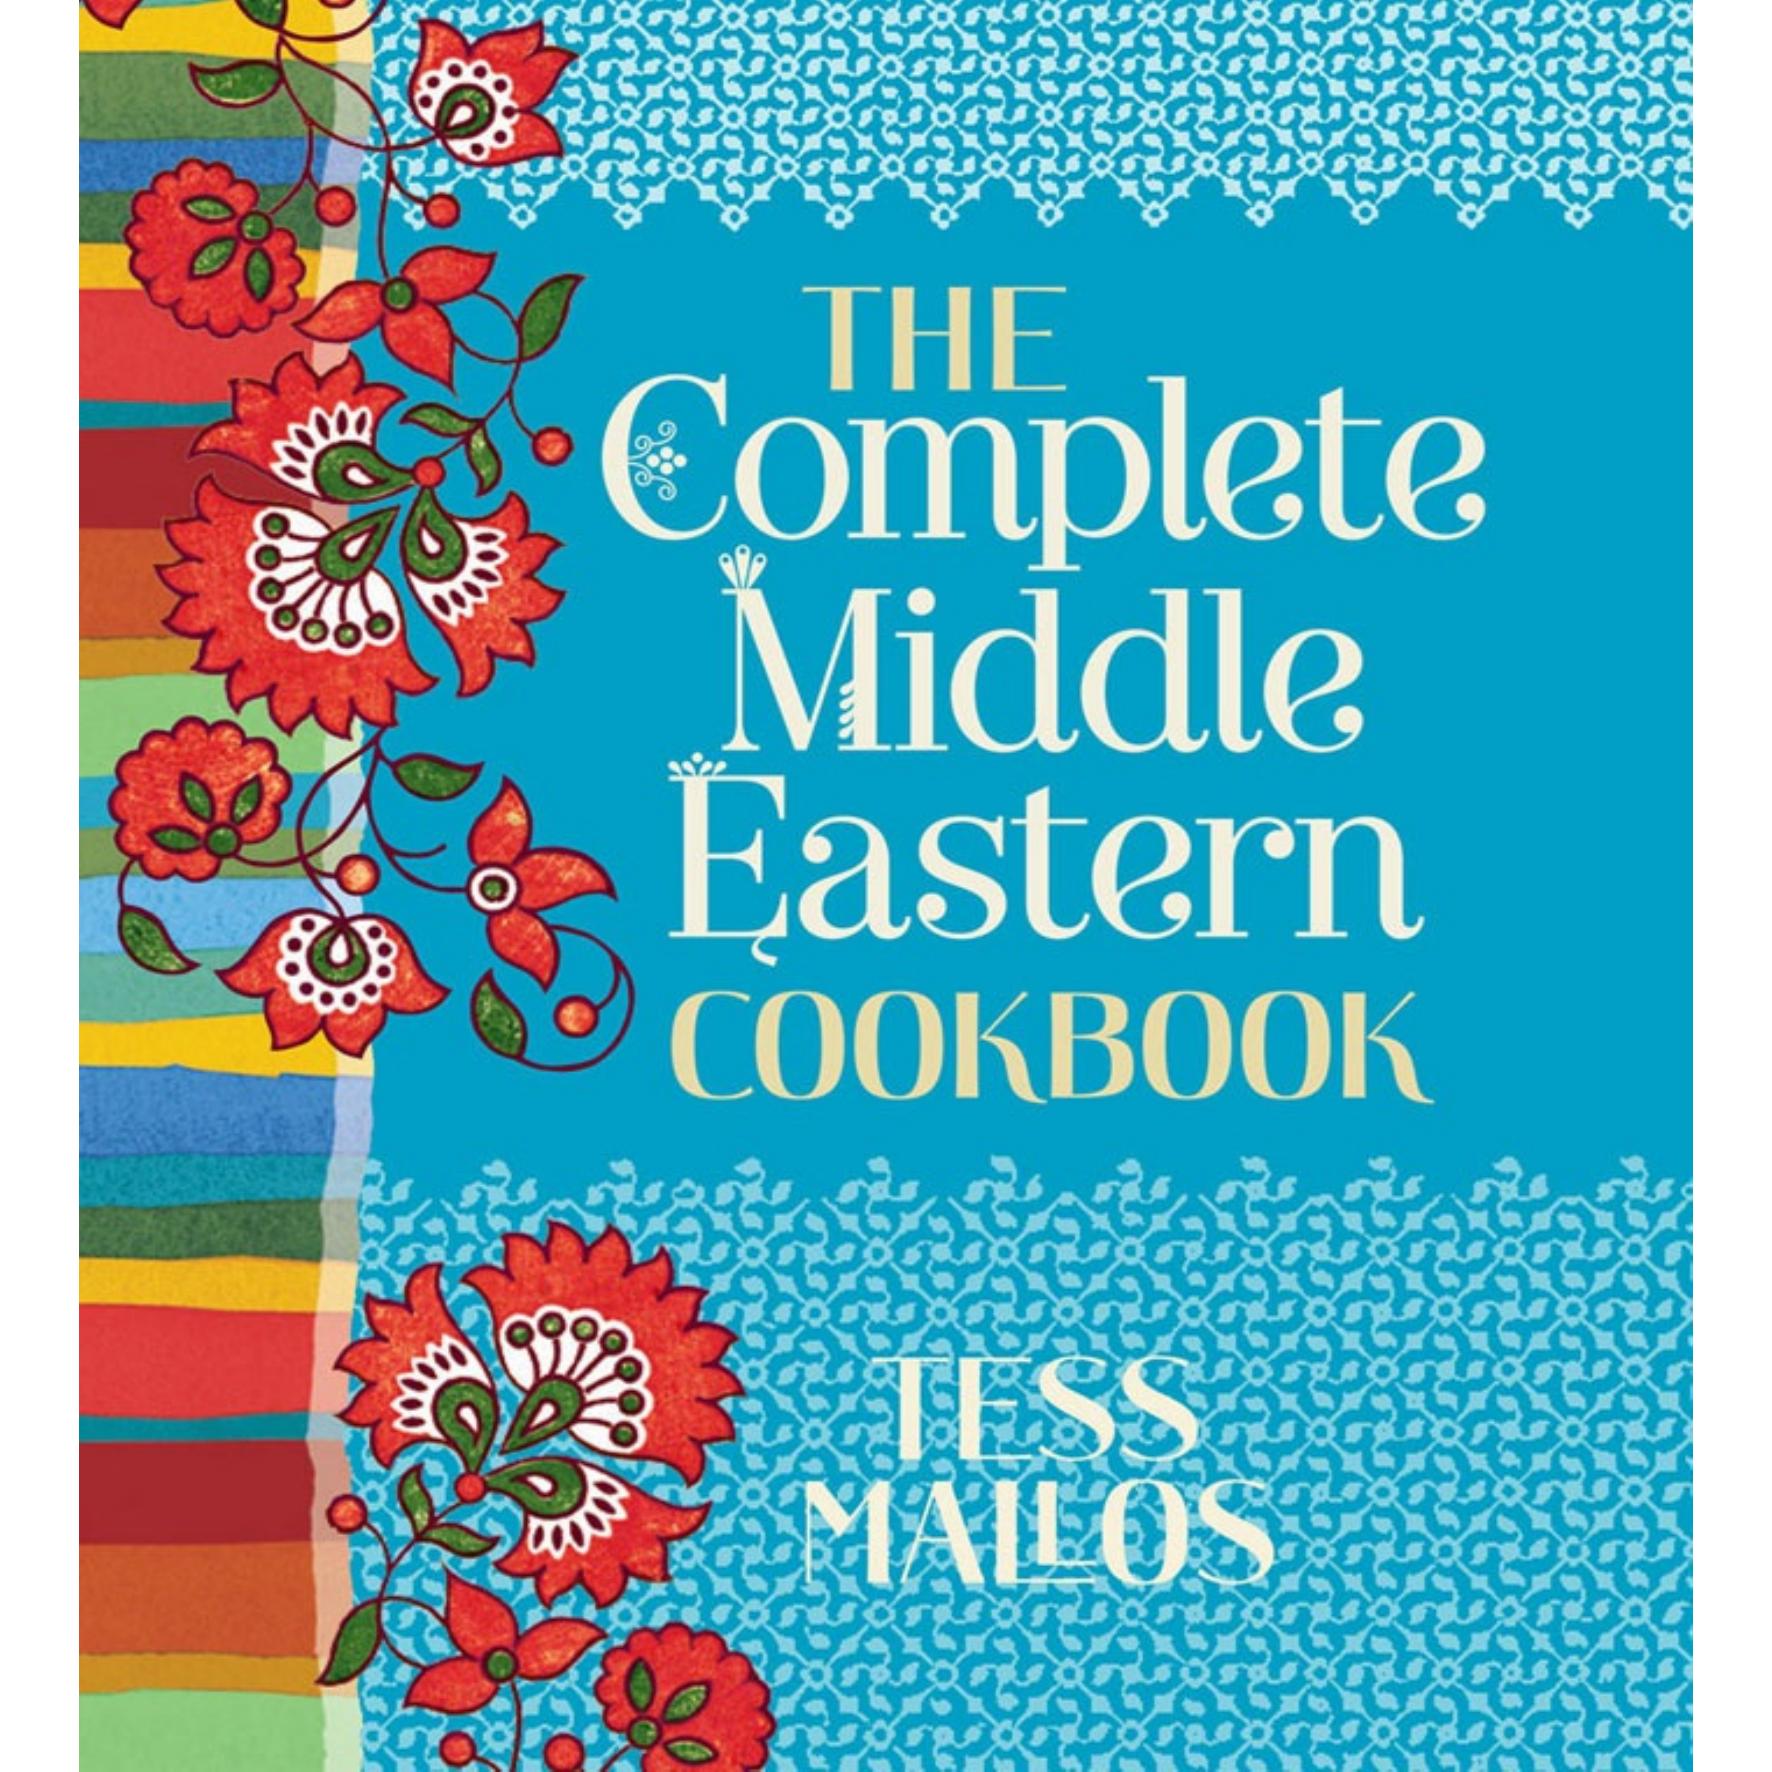 Complete Middle Eastern Cookbook by Tess Mallos